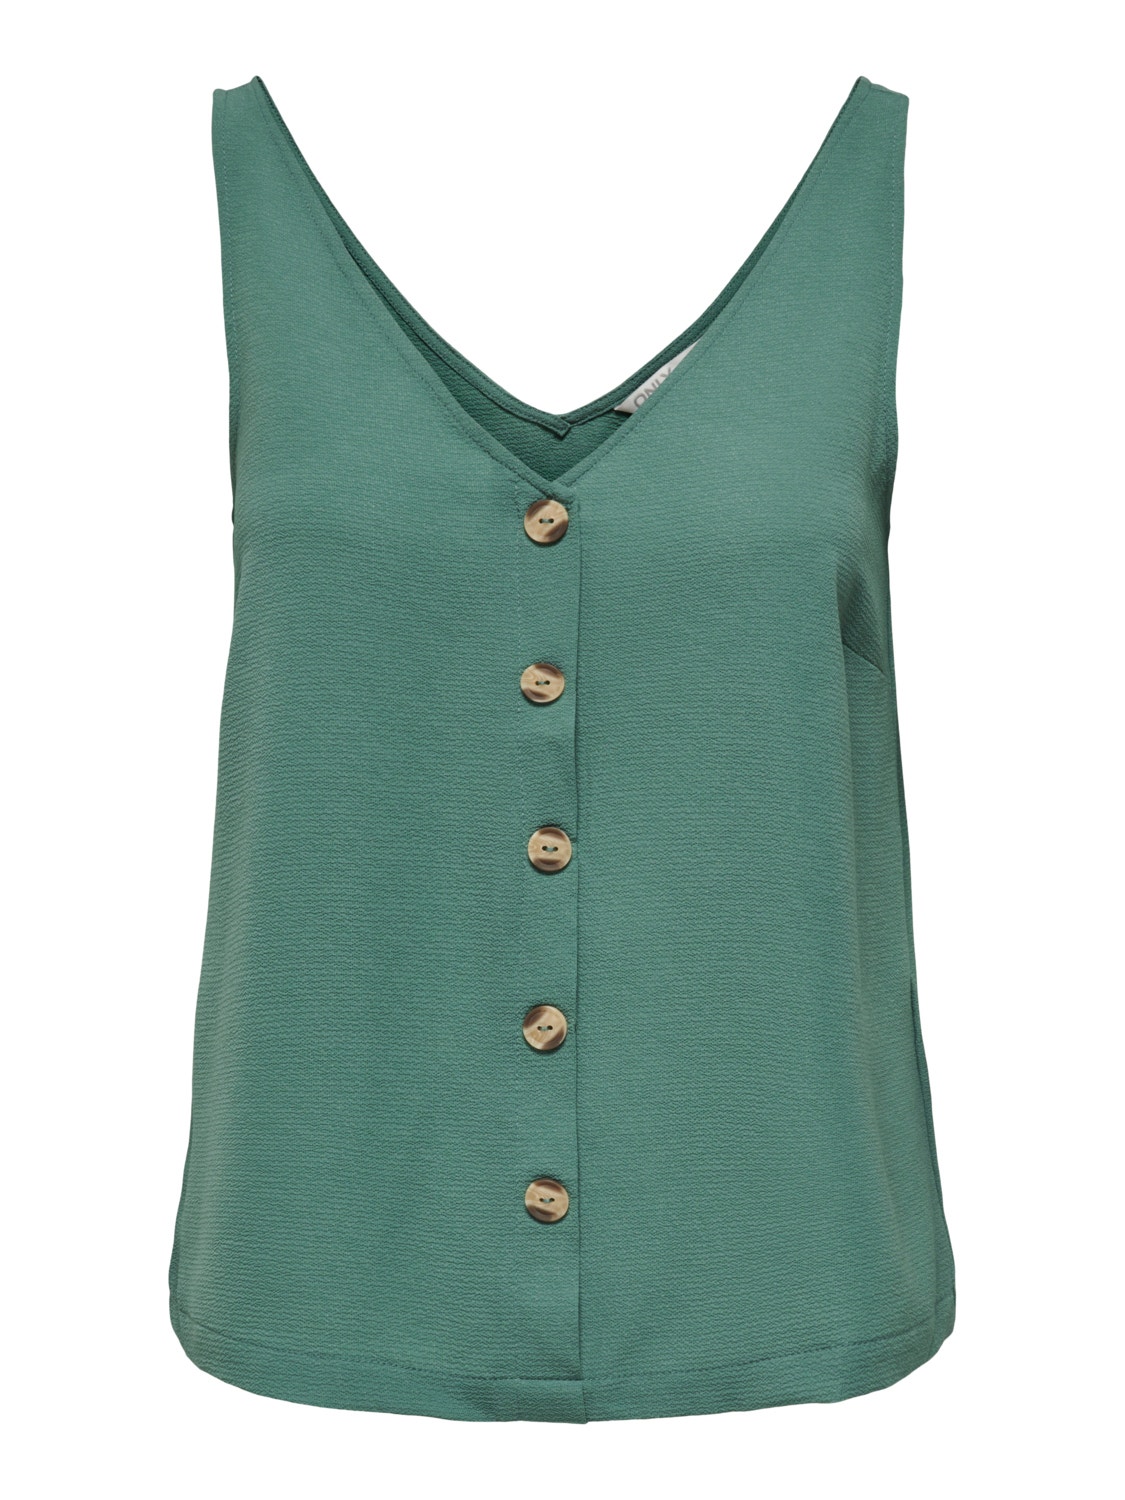 ONLY Button detail Top -Blue Spruce - 15230066